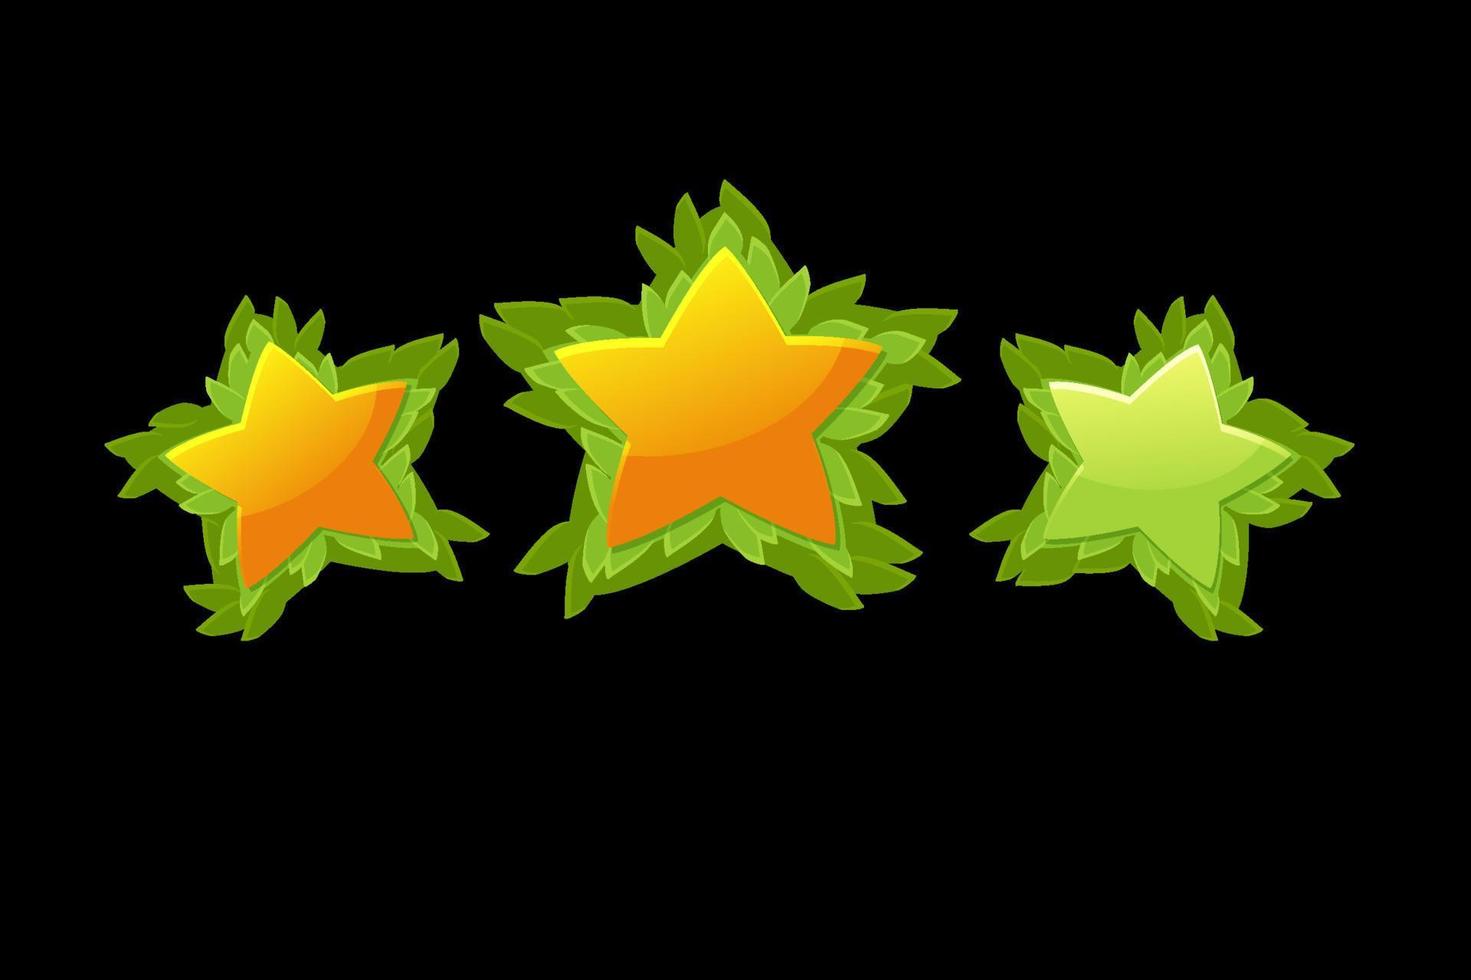 Set of vector decorative star rating game from leaves. Collection of natural green stars for interface.